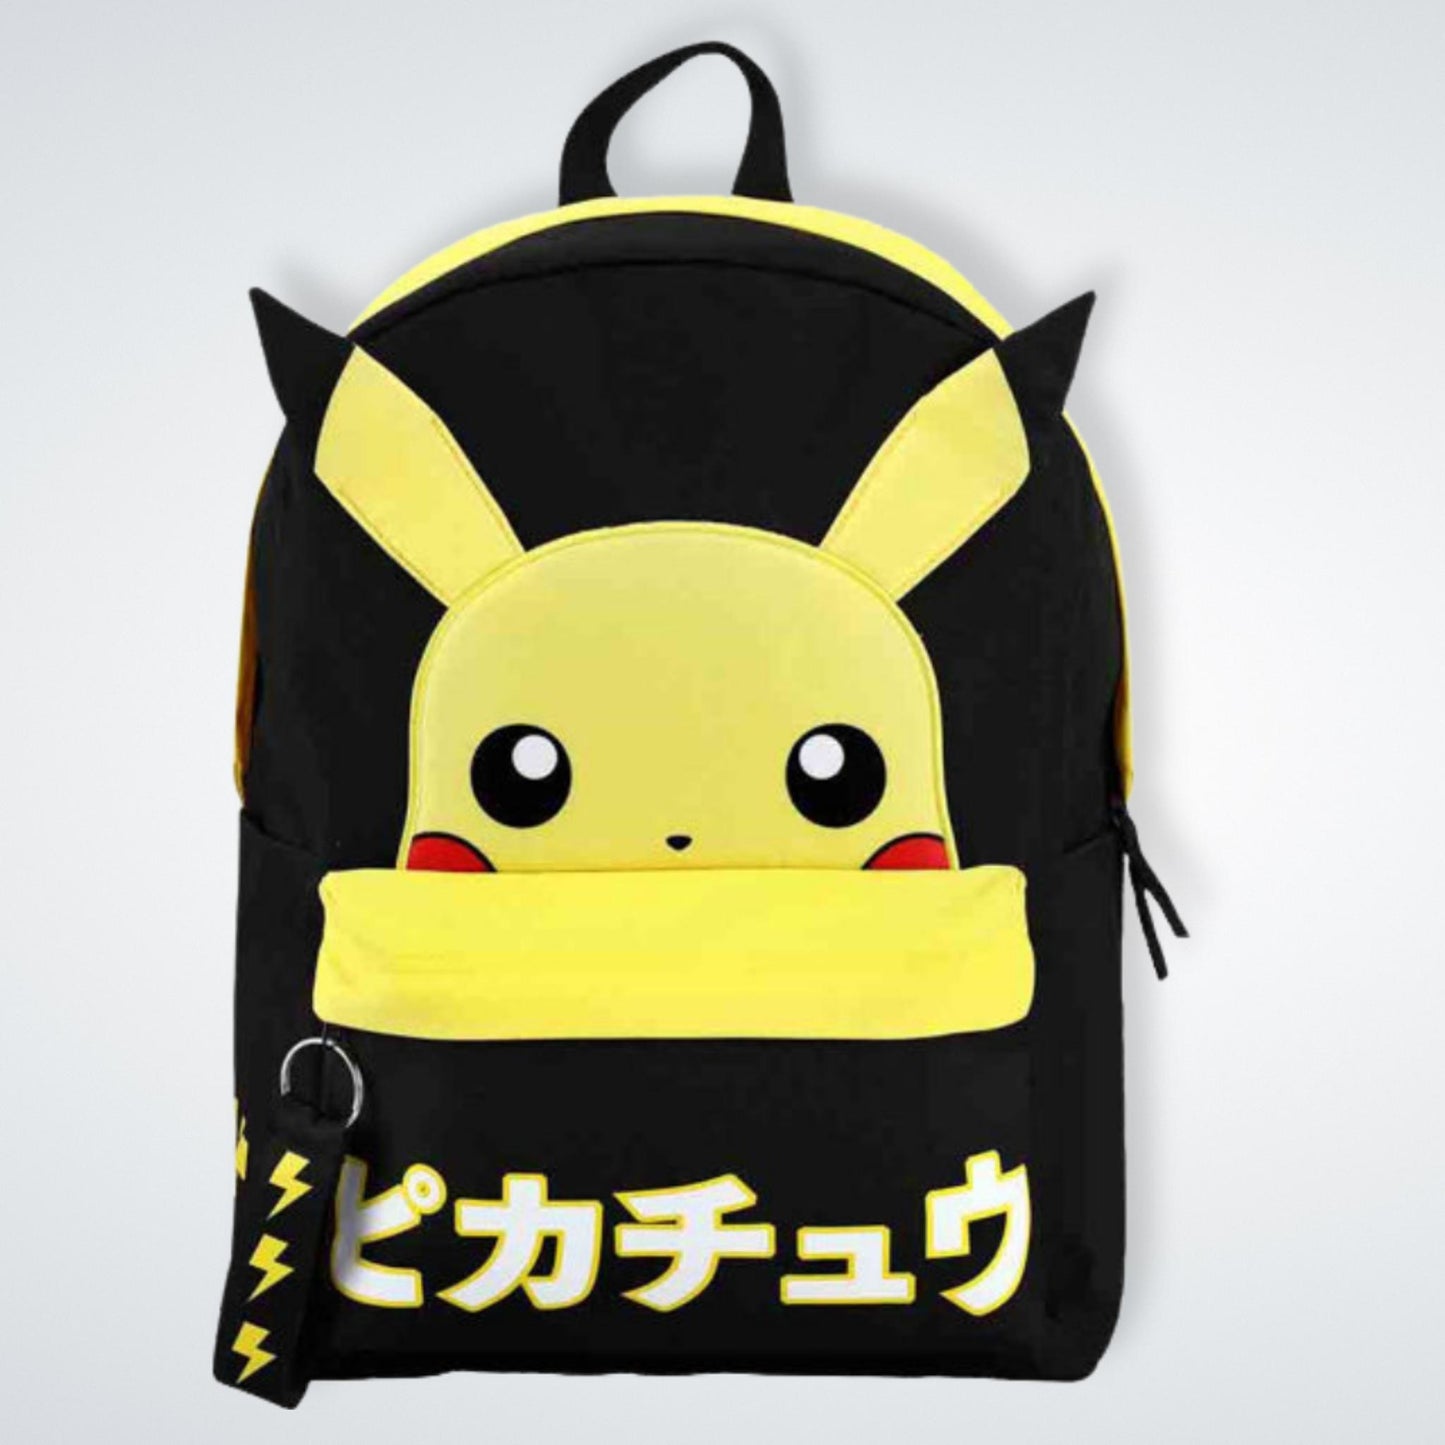 Load image into Gallery viewer, Pikachu Electric Type (Pokemon) Backpack
